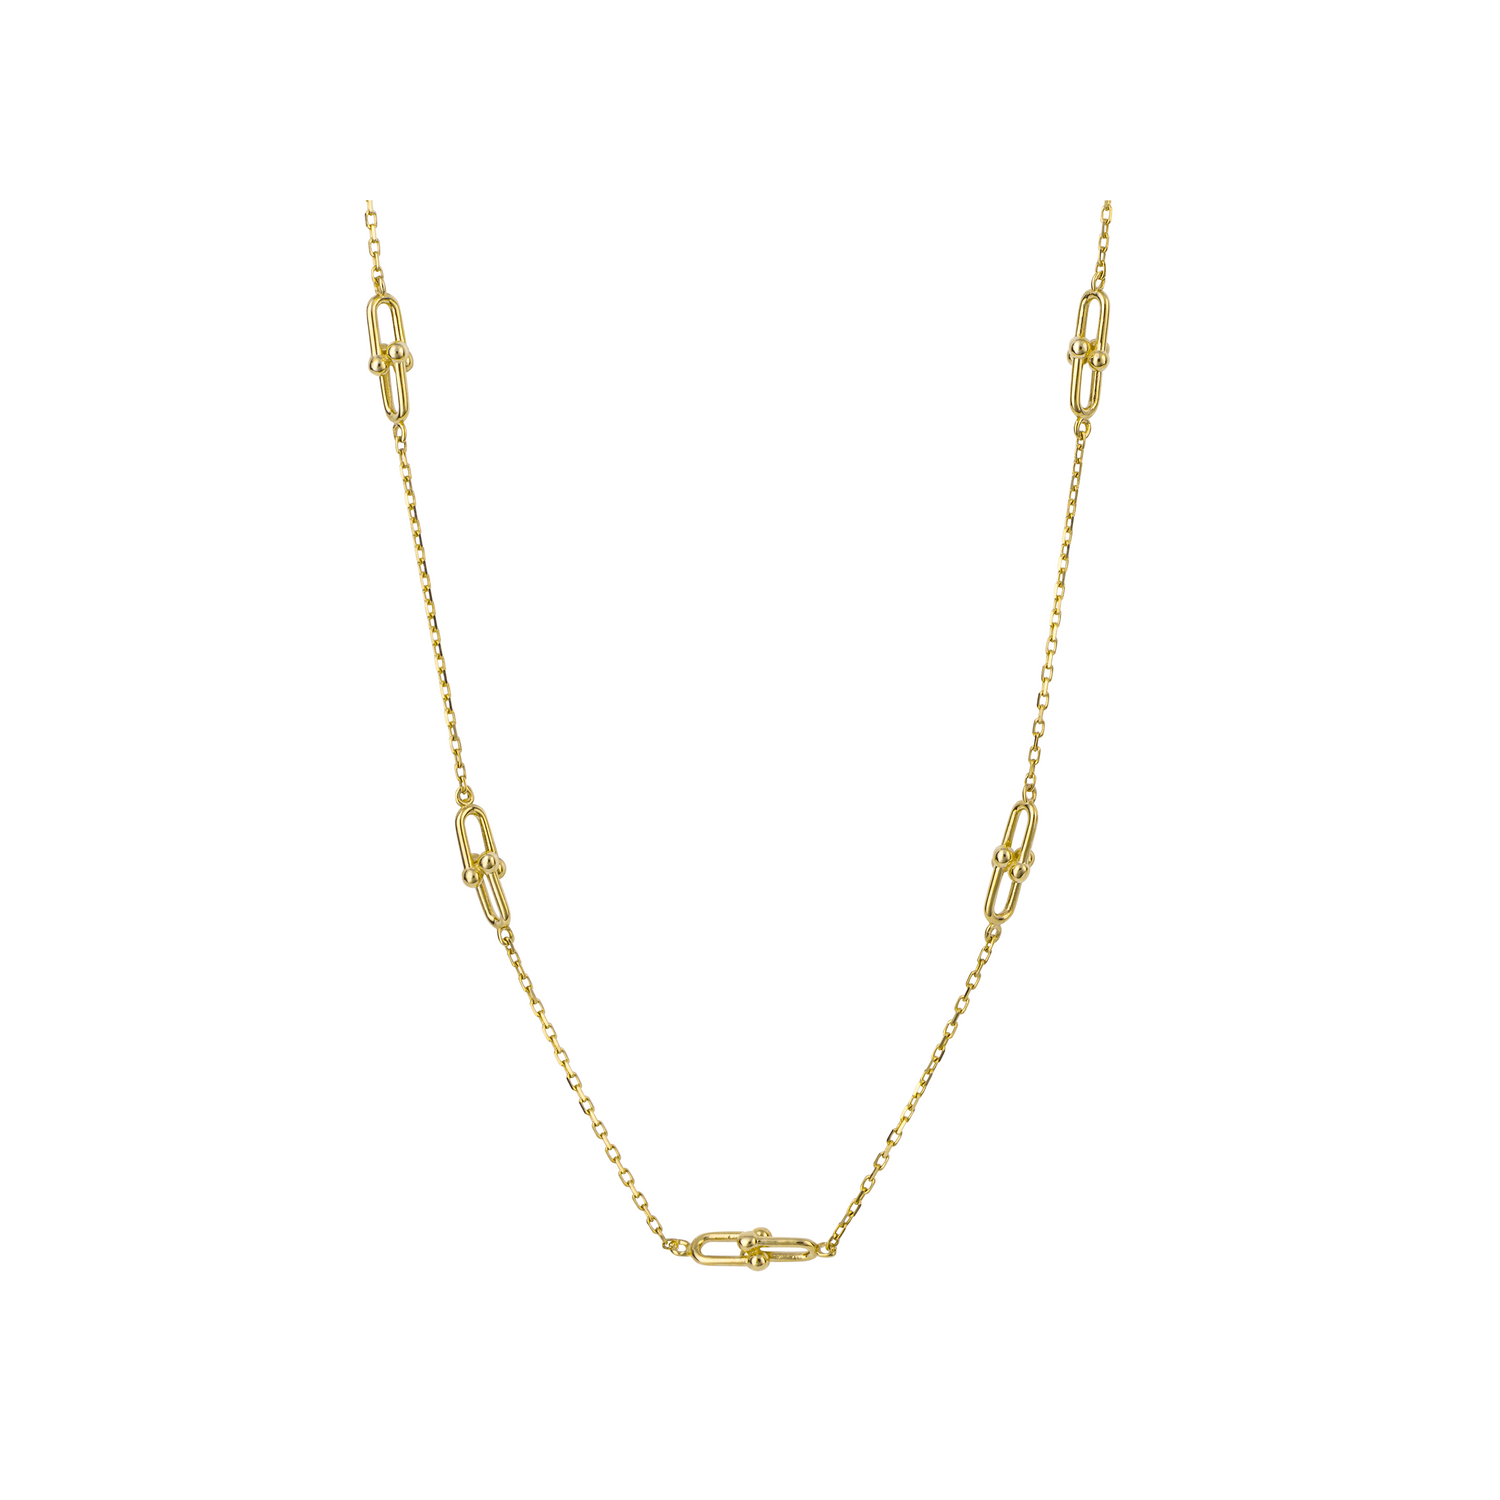 U Shape Link Station Necklace in 9ct Yellow Gold - Robert Anthony Jewellers, Edinburgh